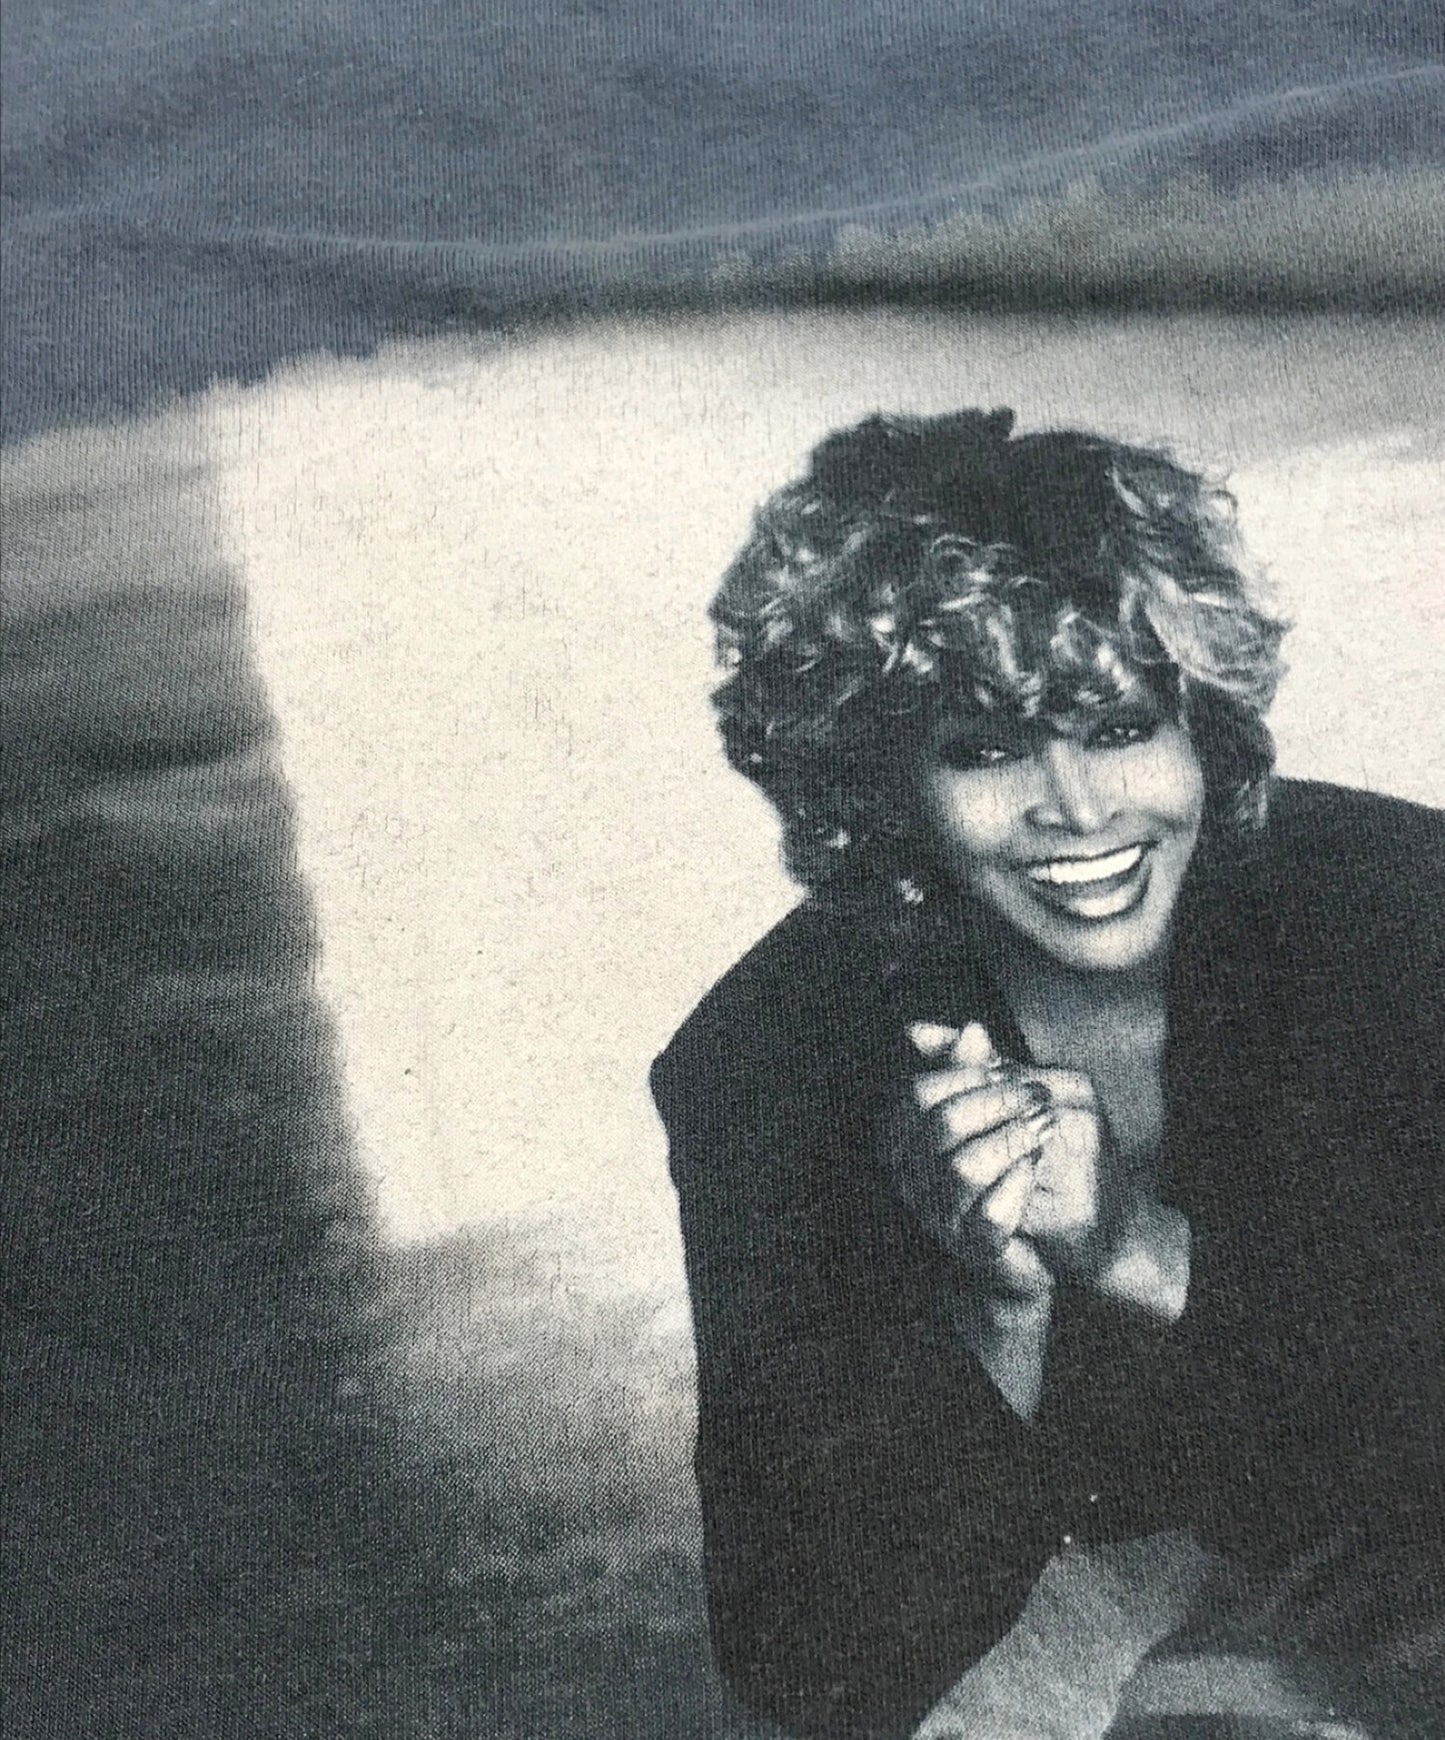 [Pre-owned] [Vintage Clothes] Tina Turner Artist T-shirt